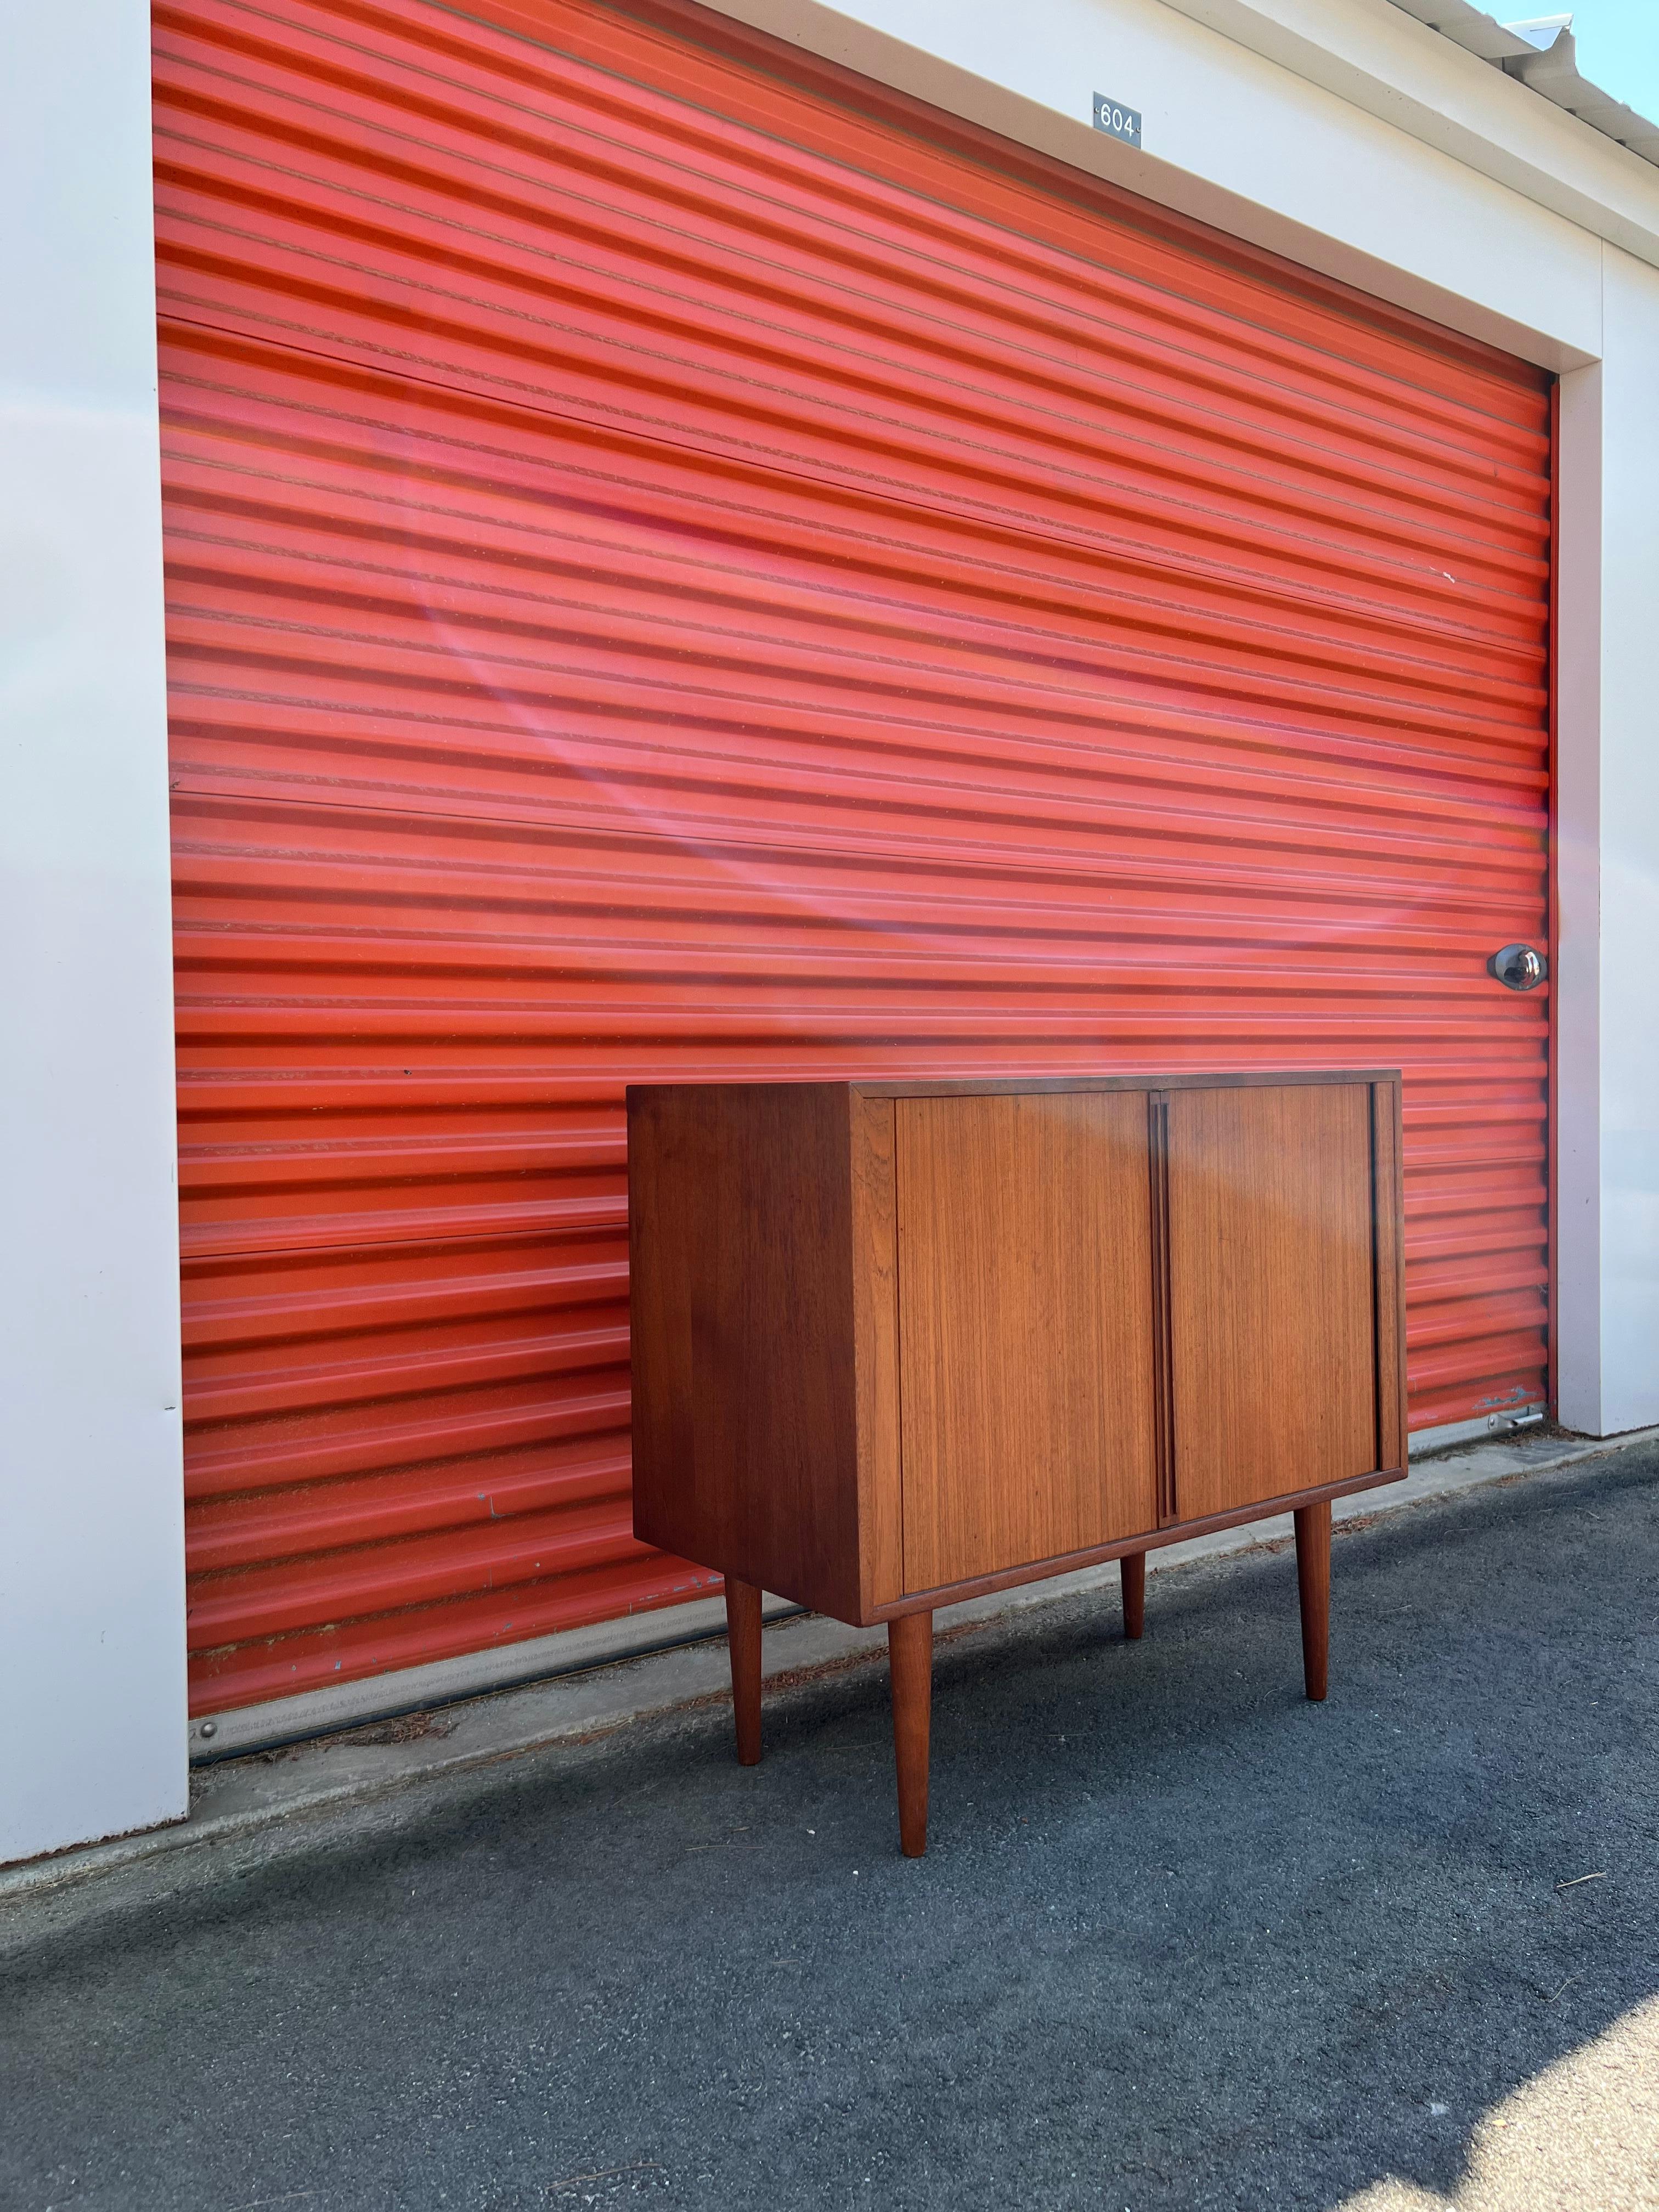 Stylish and compact teak cabinet designed in the 1960s by Kai Kristiansen for Feldballes Møbelfabrik of Denmark.
The two tambour doors with elongated, recessed pulls open to reveal seven sections for records with built-in dividers above two